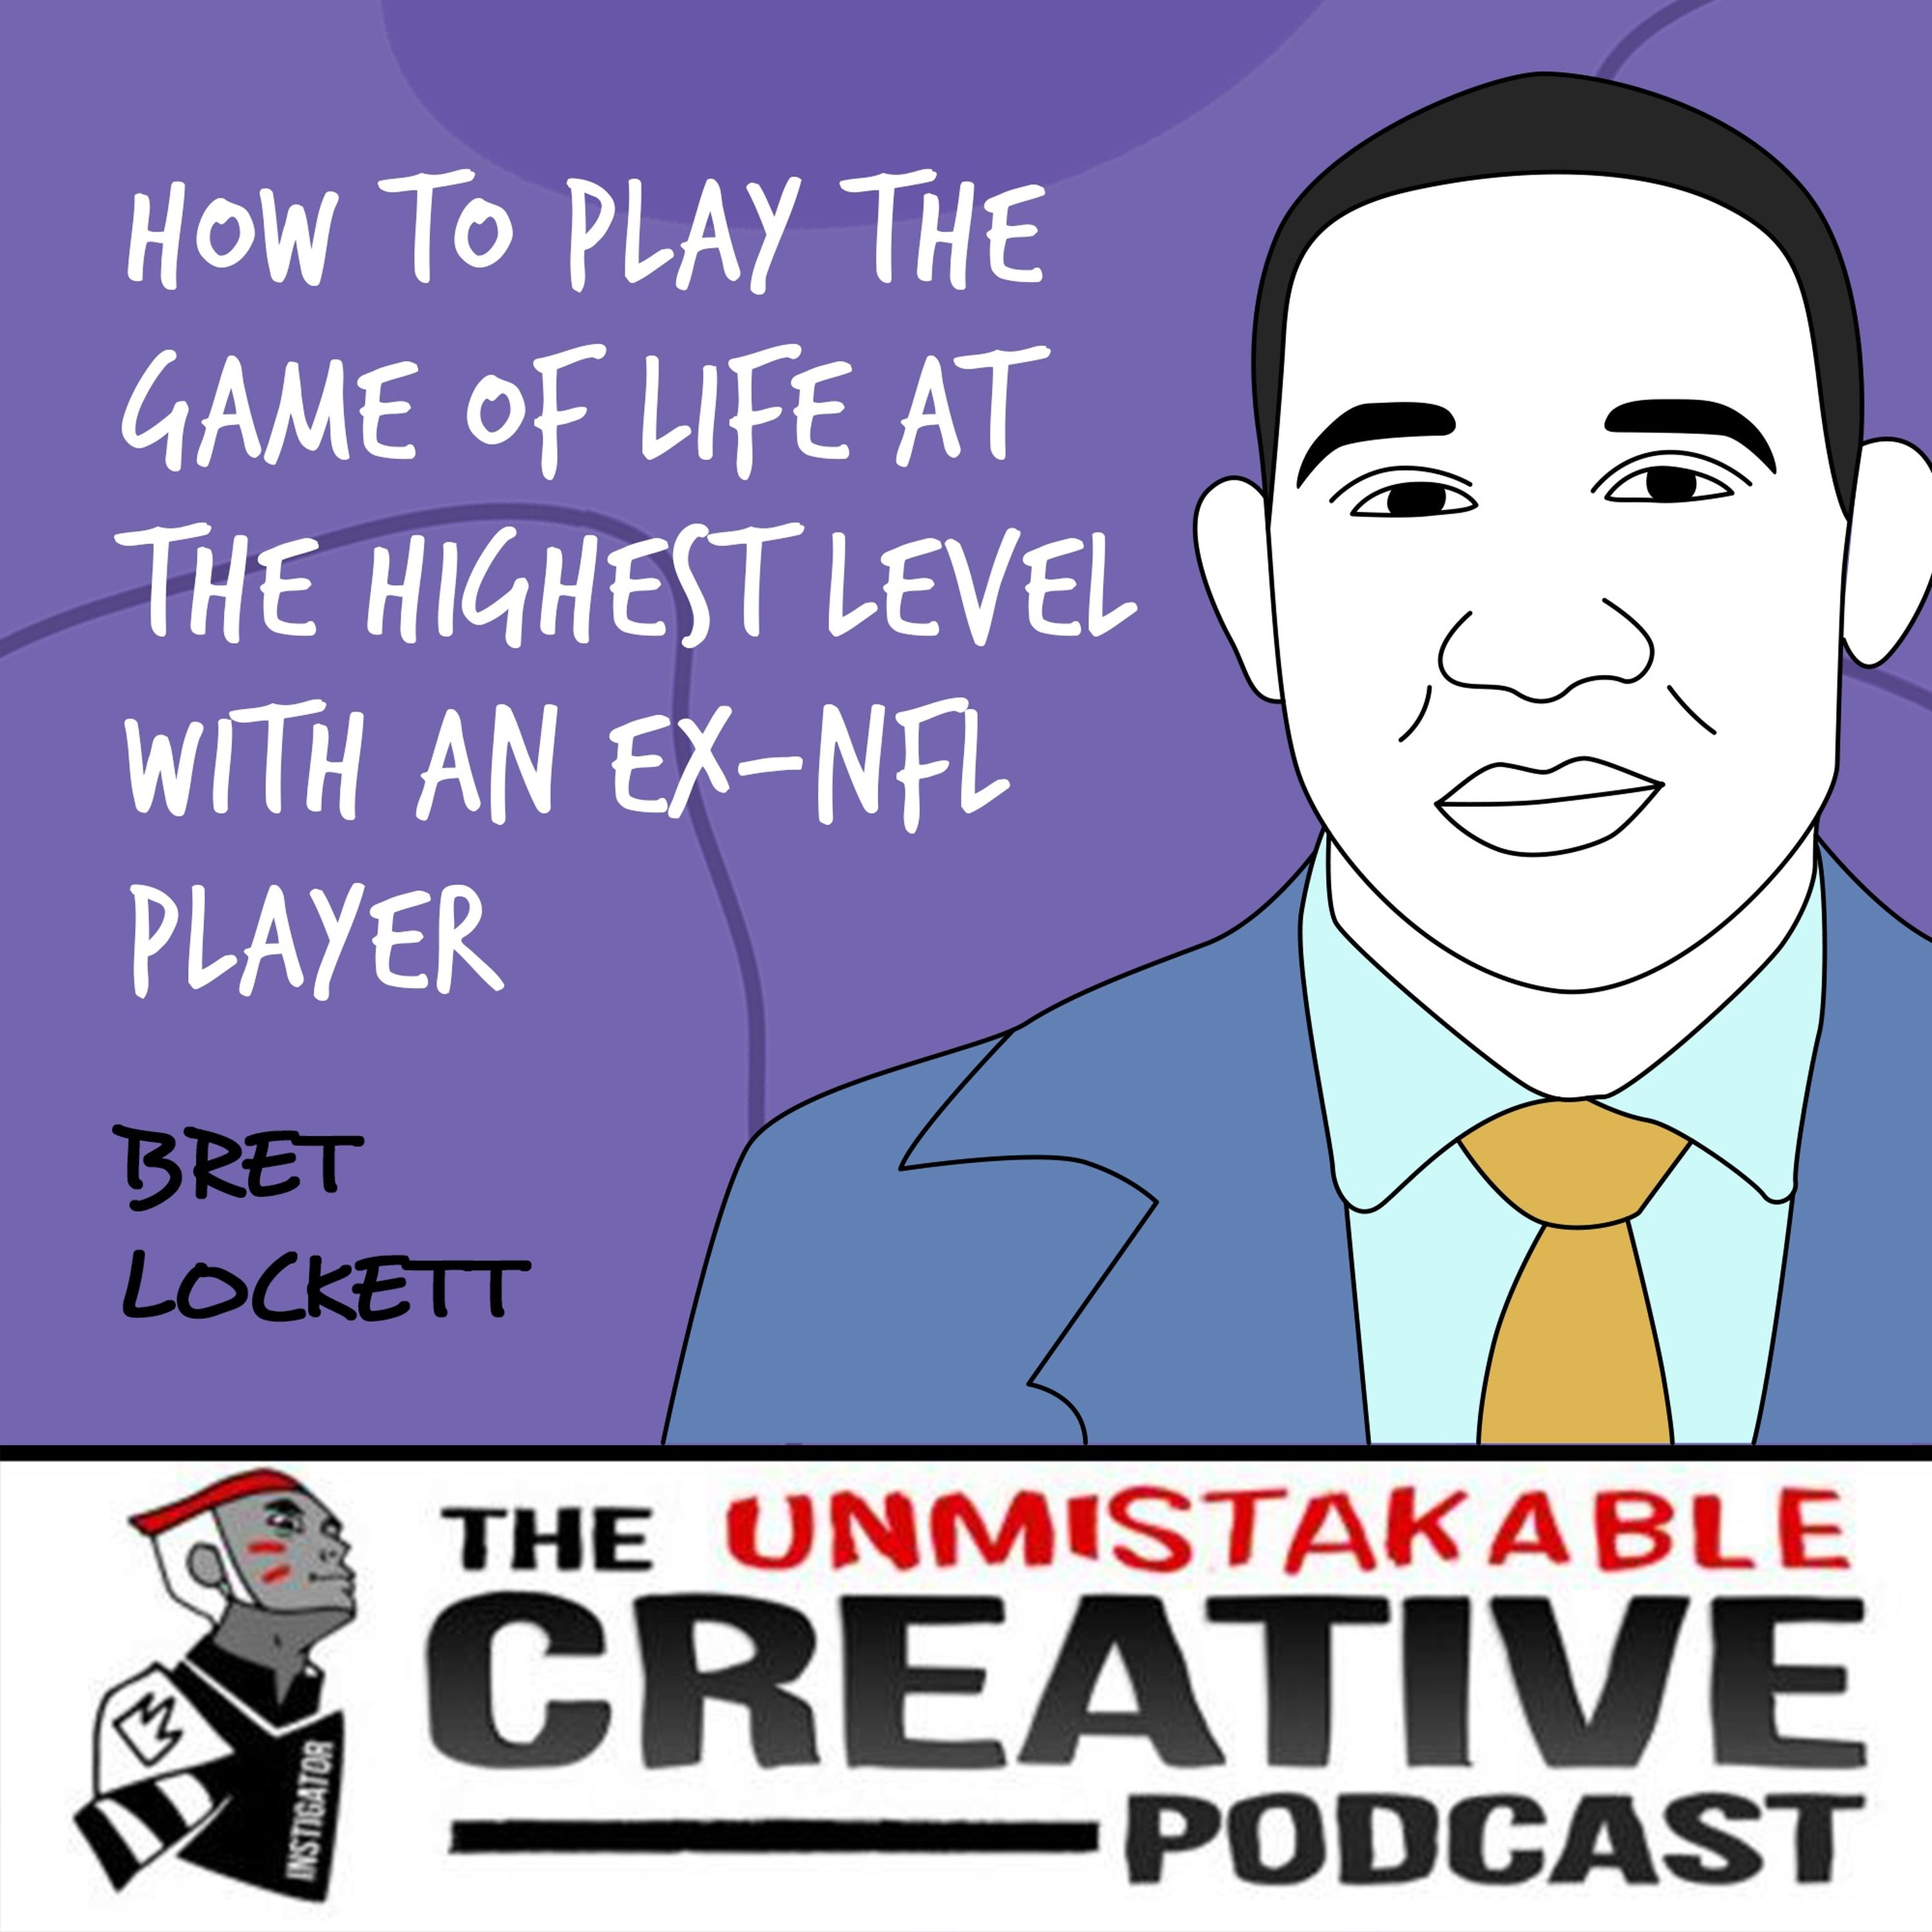 Bret Lockett | How to Play The Game of Life at The Highest Level with an Ex-NFL Player Image